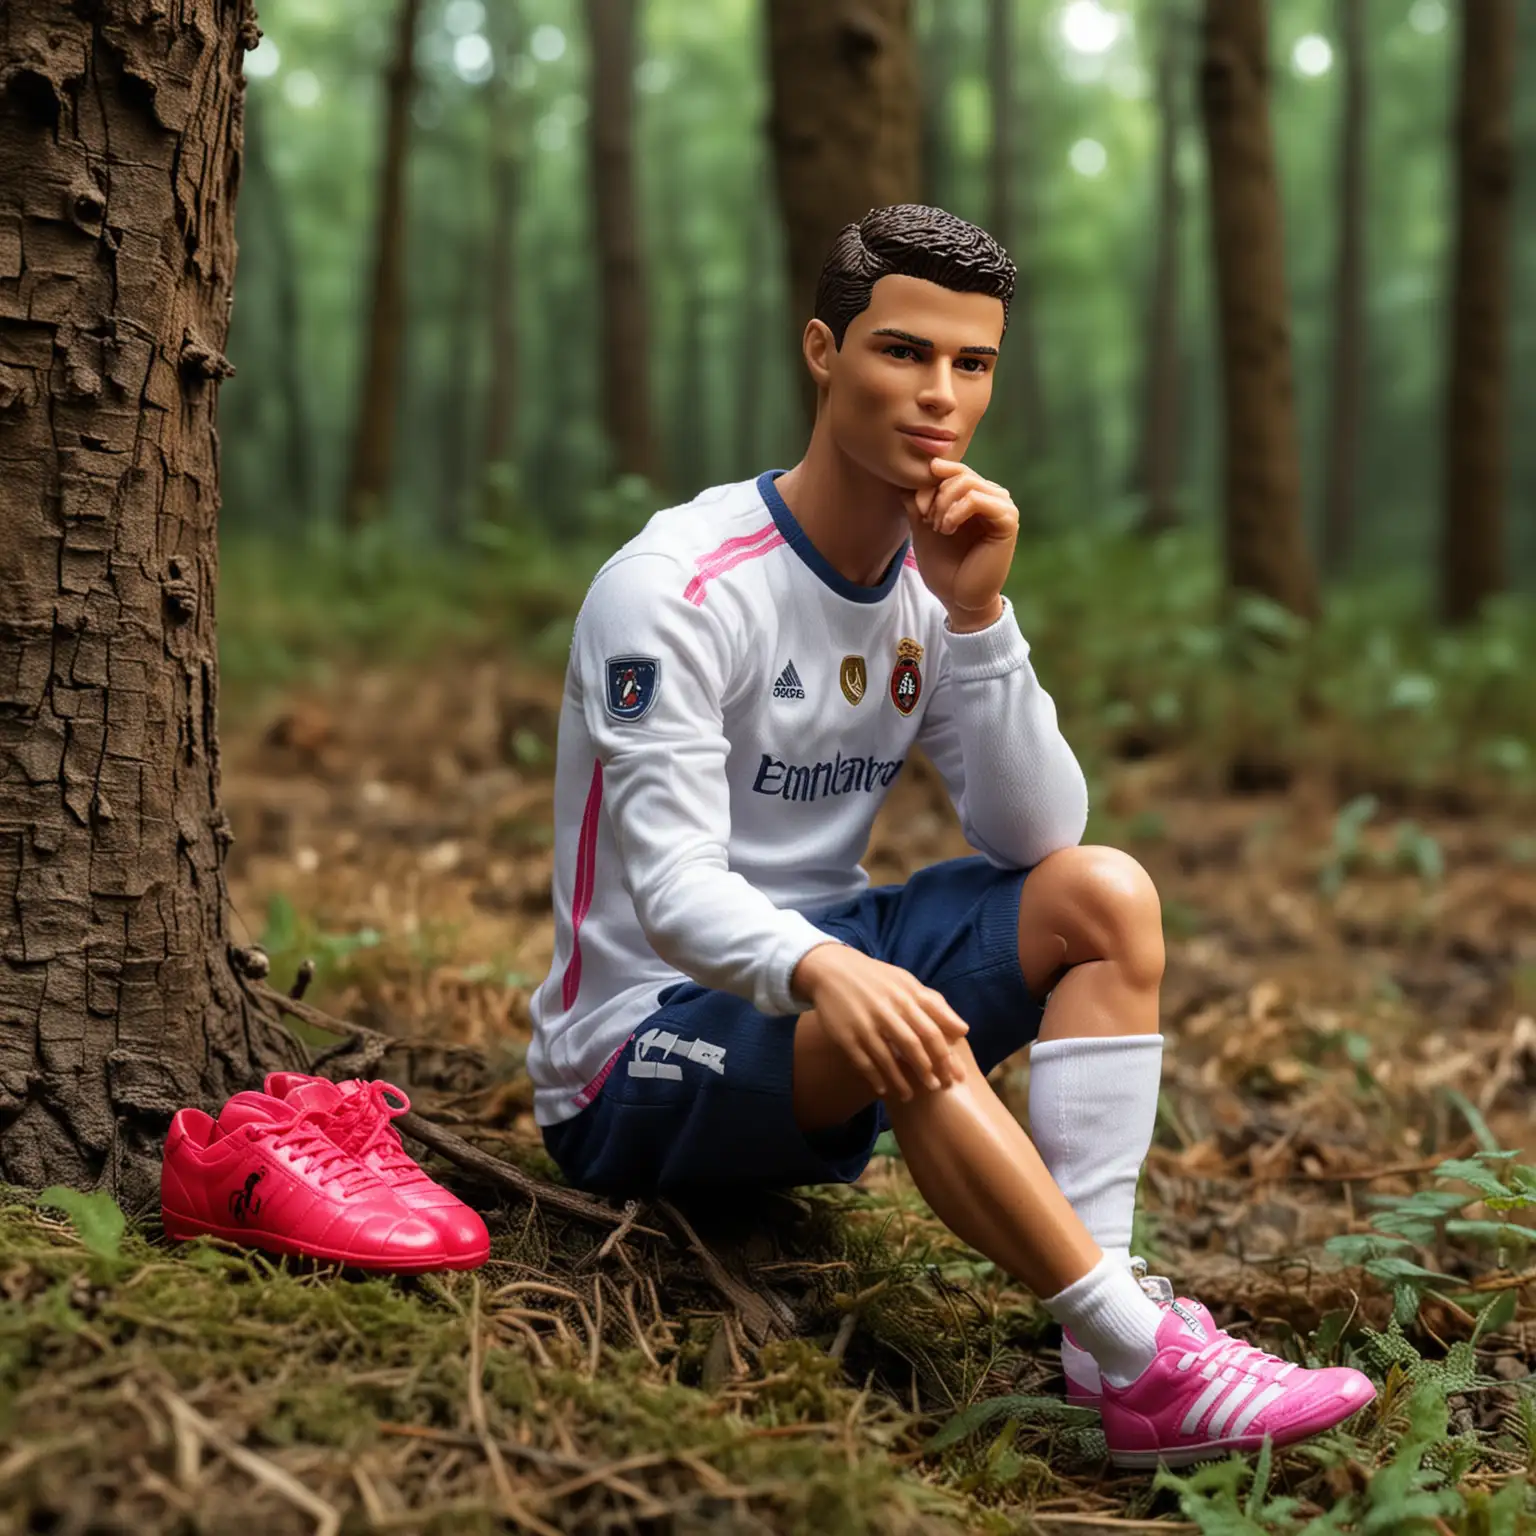 Celebrity Barbie Doll Cristiano Ronaldo Relaxing in Enchanted Forest